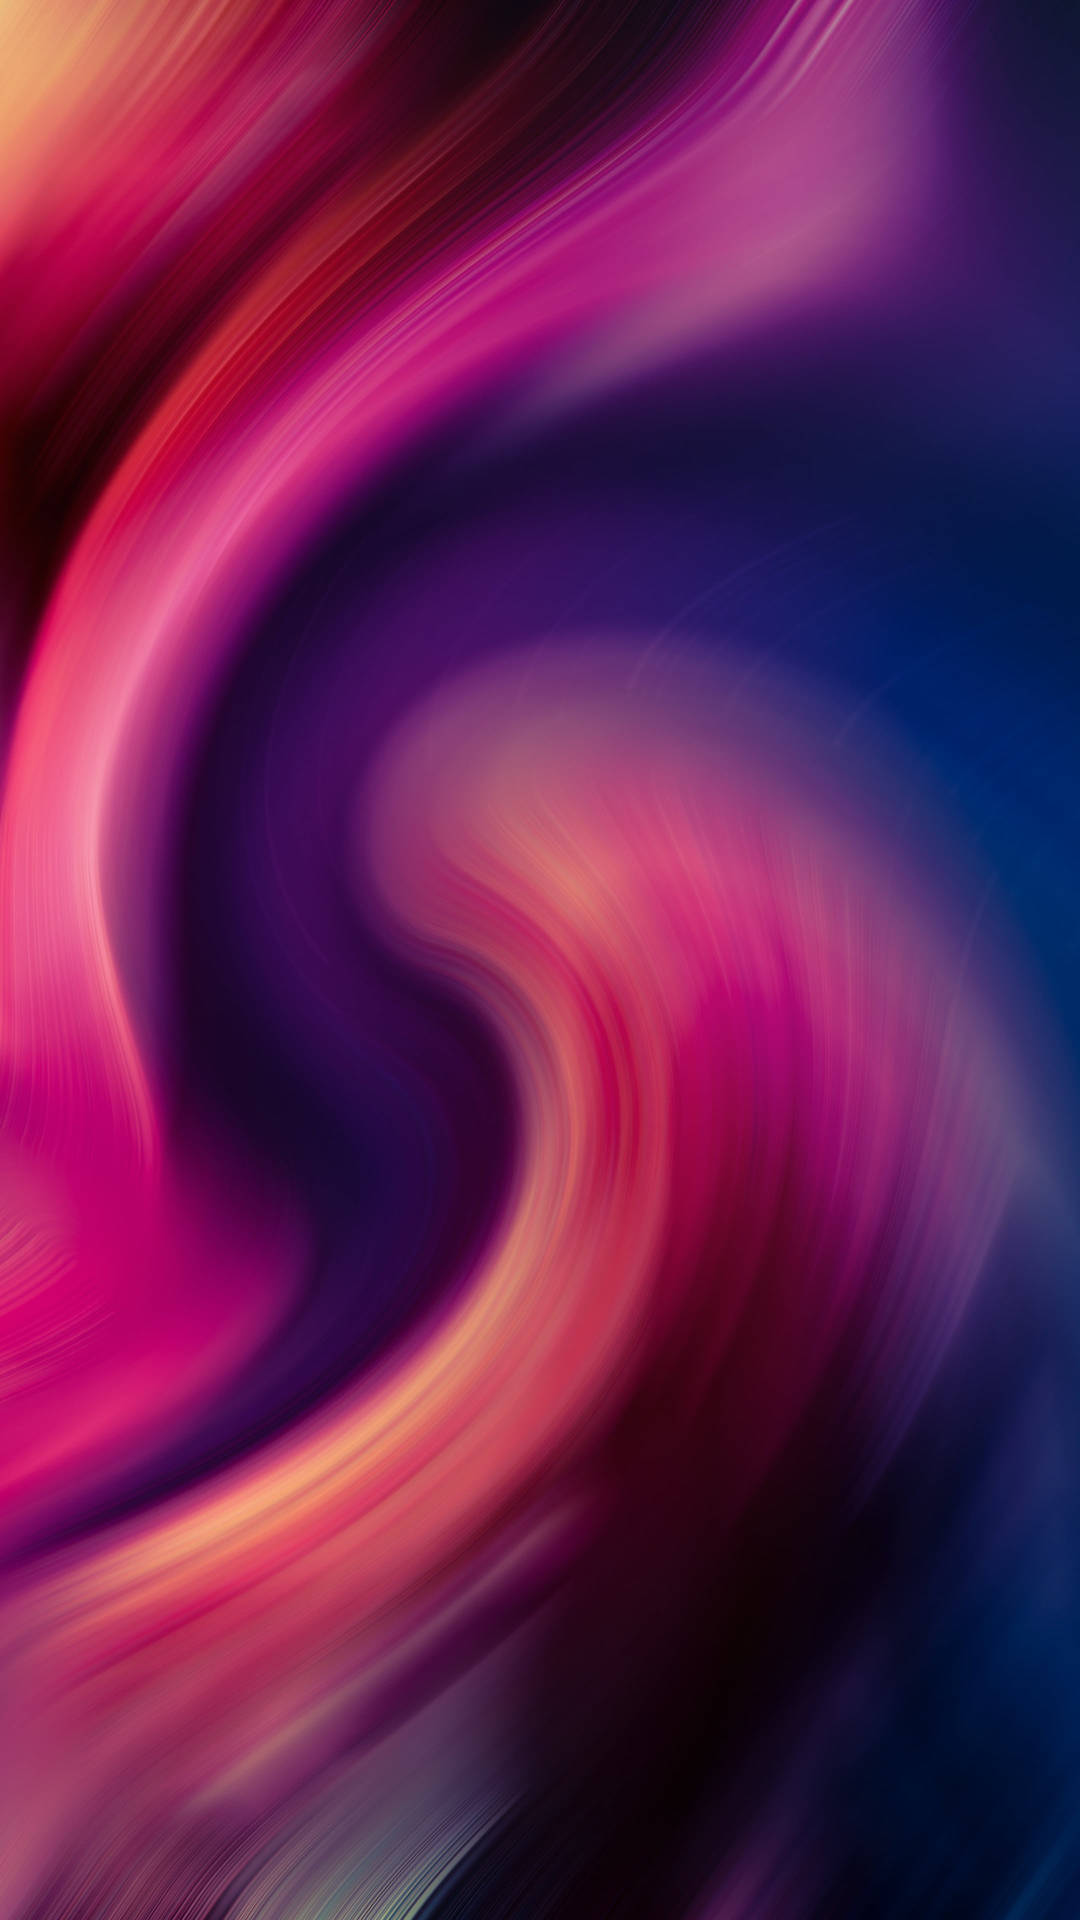 Abstract Purple Whirlpool Redmi Note 9 Pro Background